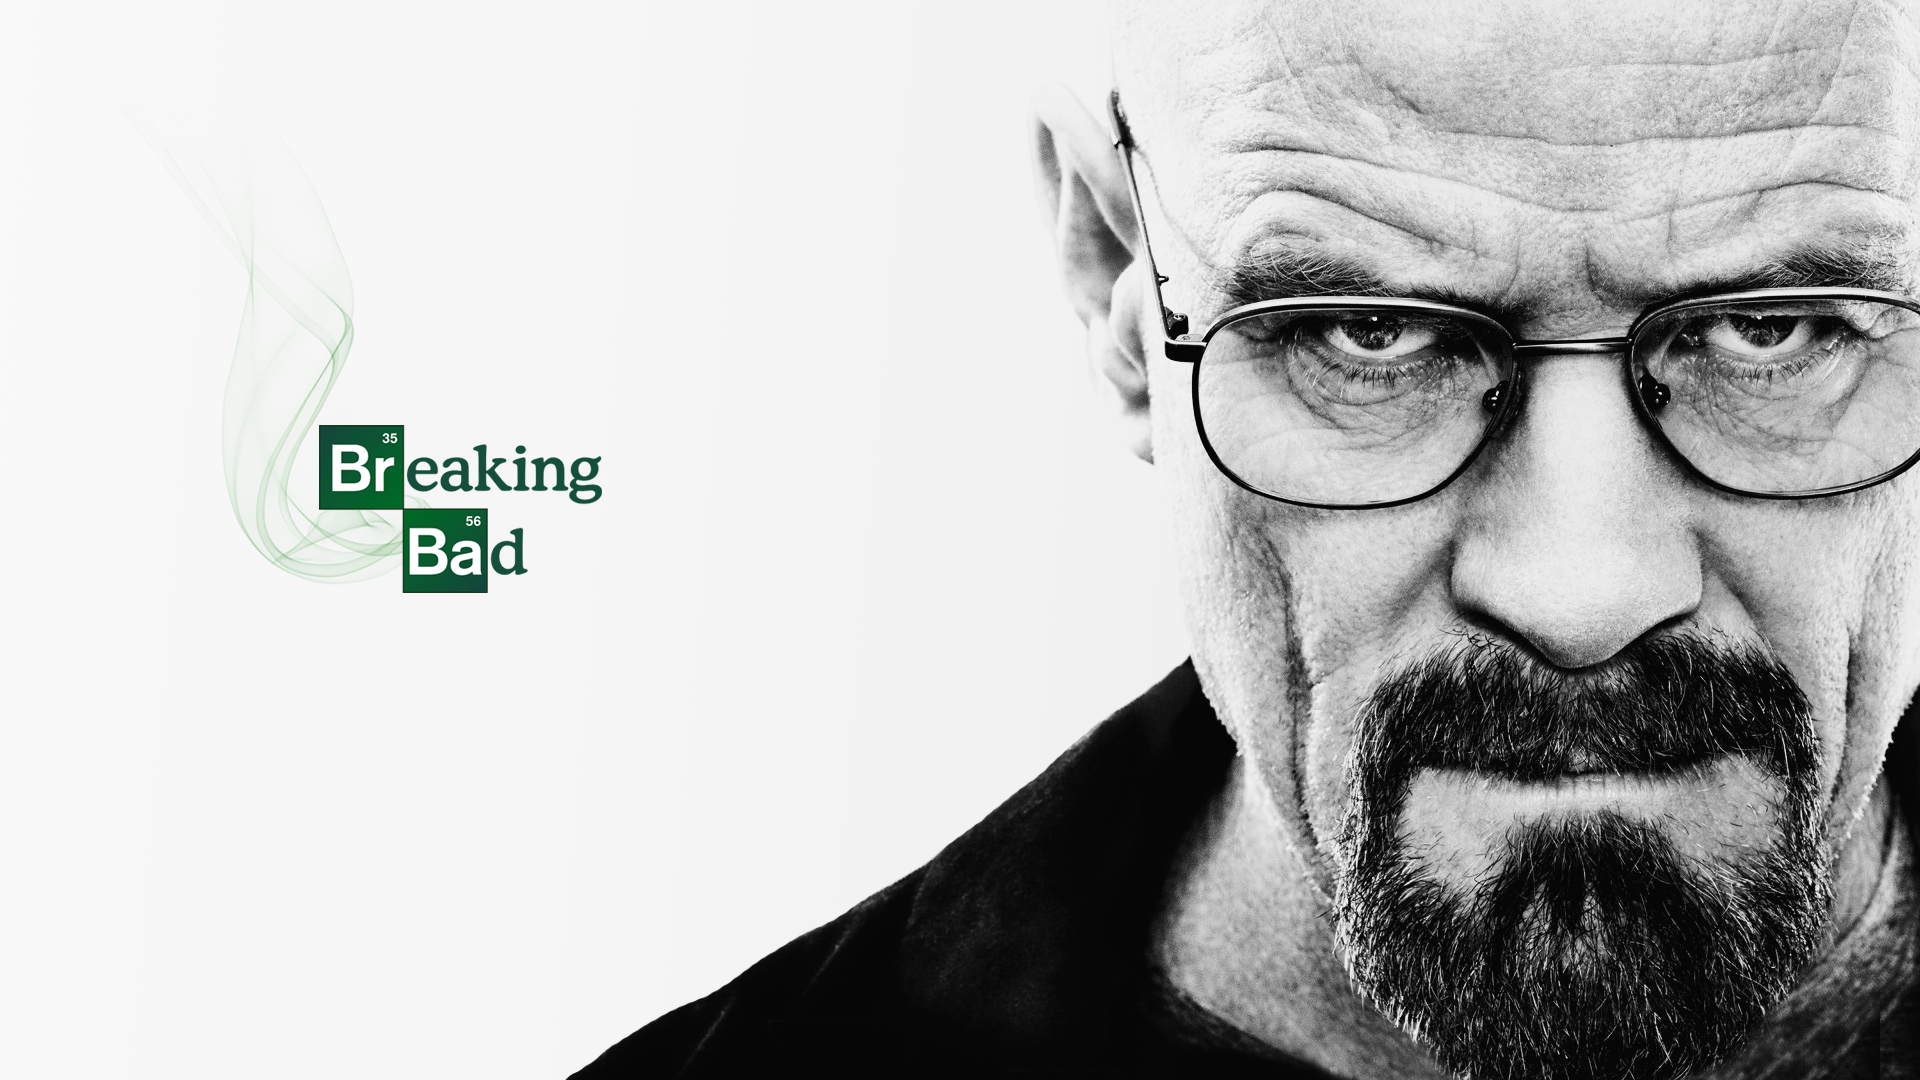 Mobile wallpaper Breaking Bad Tv Show Bryan Cranston Walter White  Jesse Pinkman Aaron Paul 1205085 download the picture for free